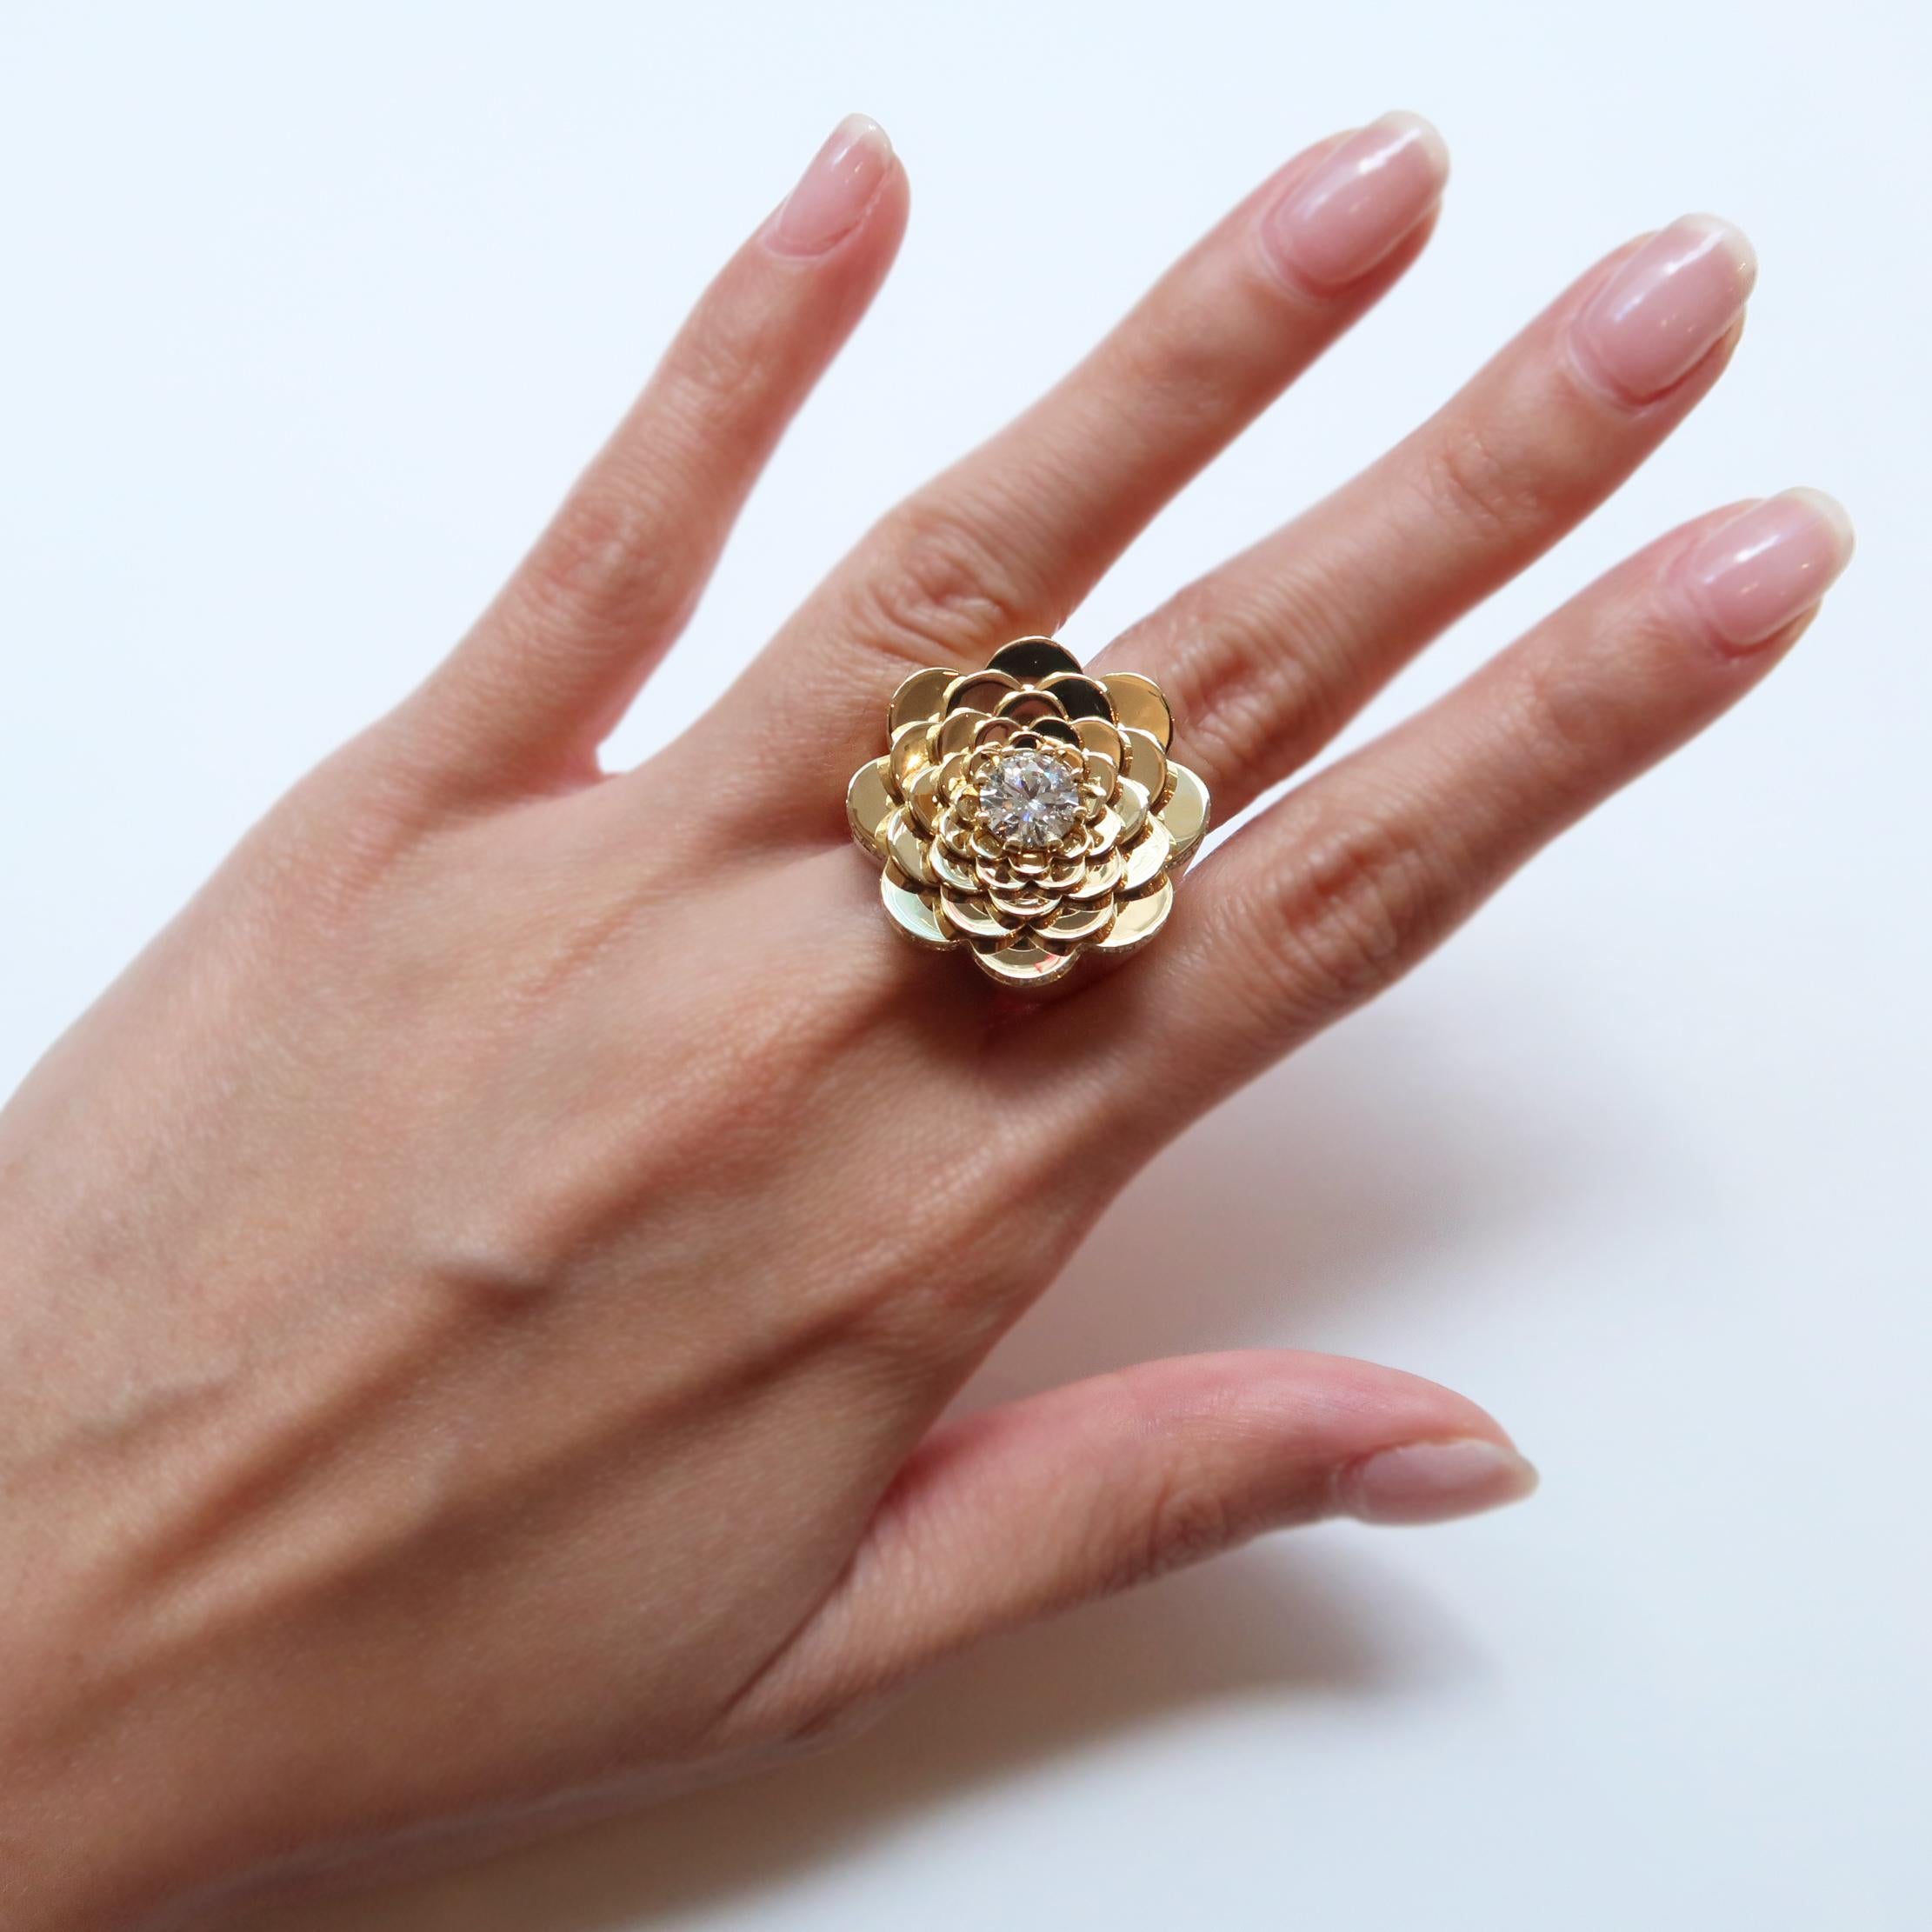 Intricately detailed blooms. A layered petal pattern adorned with pave diamonds that surround the outer petals, and a glimmering diamond center, creates a boldly elegant cocktail ring. Handcrafted in high polished 18K yellow gold and 1.75cttw GVVS-2